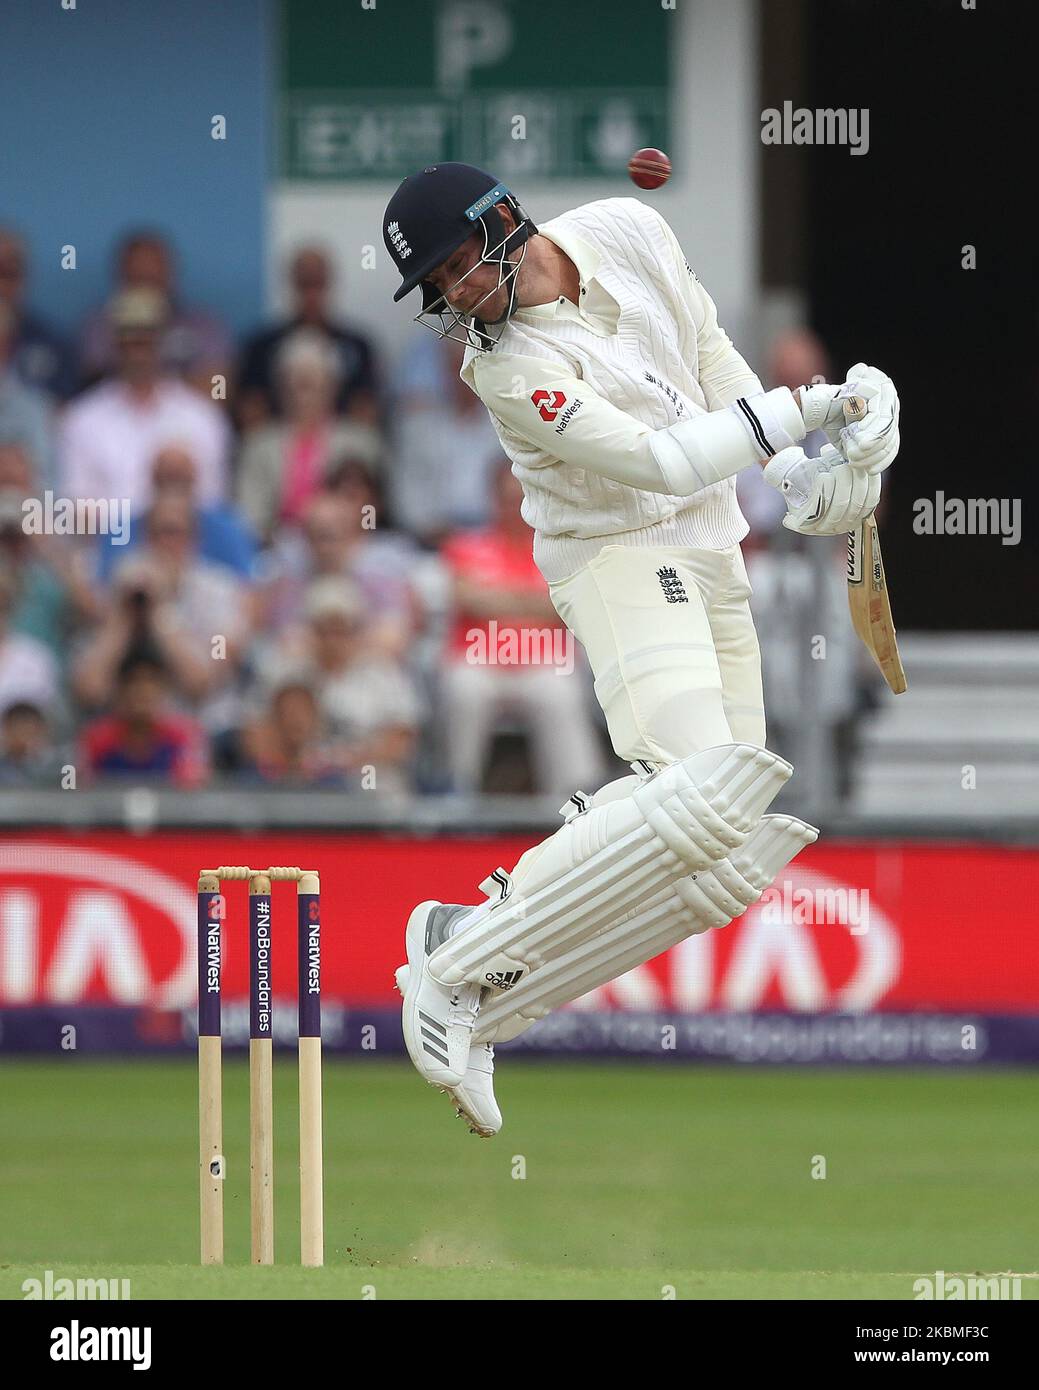 Stuart Broad of England avoids a short pitched delivery during the third day of the Second Nat West Test match between England and Pakistan at Headingley Cricket Ground, Leeds on Sunday 3rd June 2018. (Photo by Mark Fletcher/MI News/NurPhoto) Stock Photo